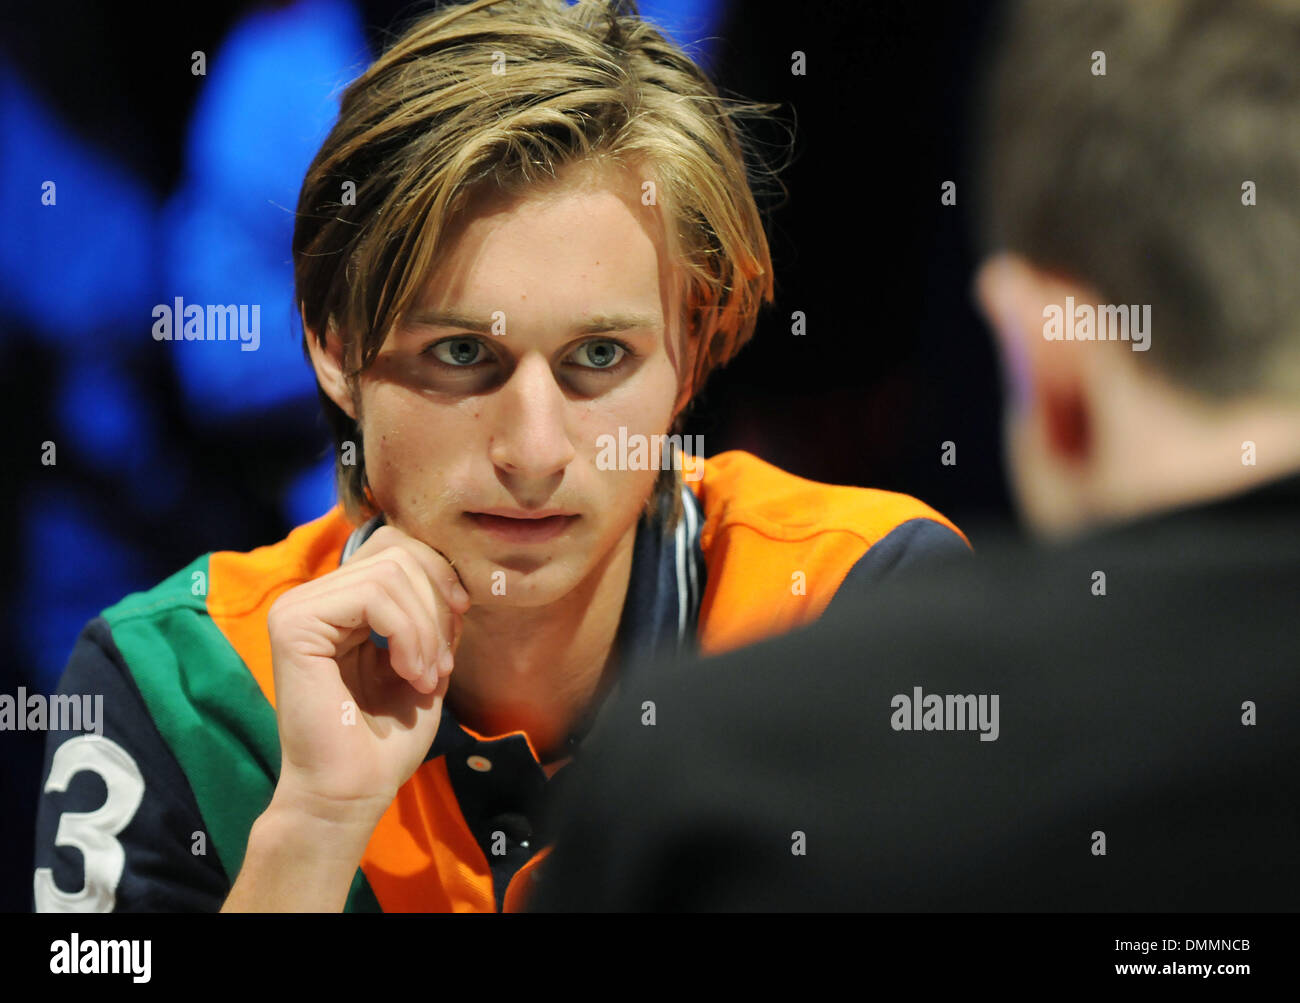 Oct 22, 2009 - Las Vegas, Nevada, USA - BJOERN HALVARD KNAPPSKOG of Norway, eyes his opponents during the final round of the Monopoly World Championship. Forty-one of the world's best Monopoly players from 40 countries competed at the two-day event inside Caesars Palace. (Credit Image: © David Becker/ZUMA Press) Stock Photo